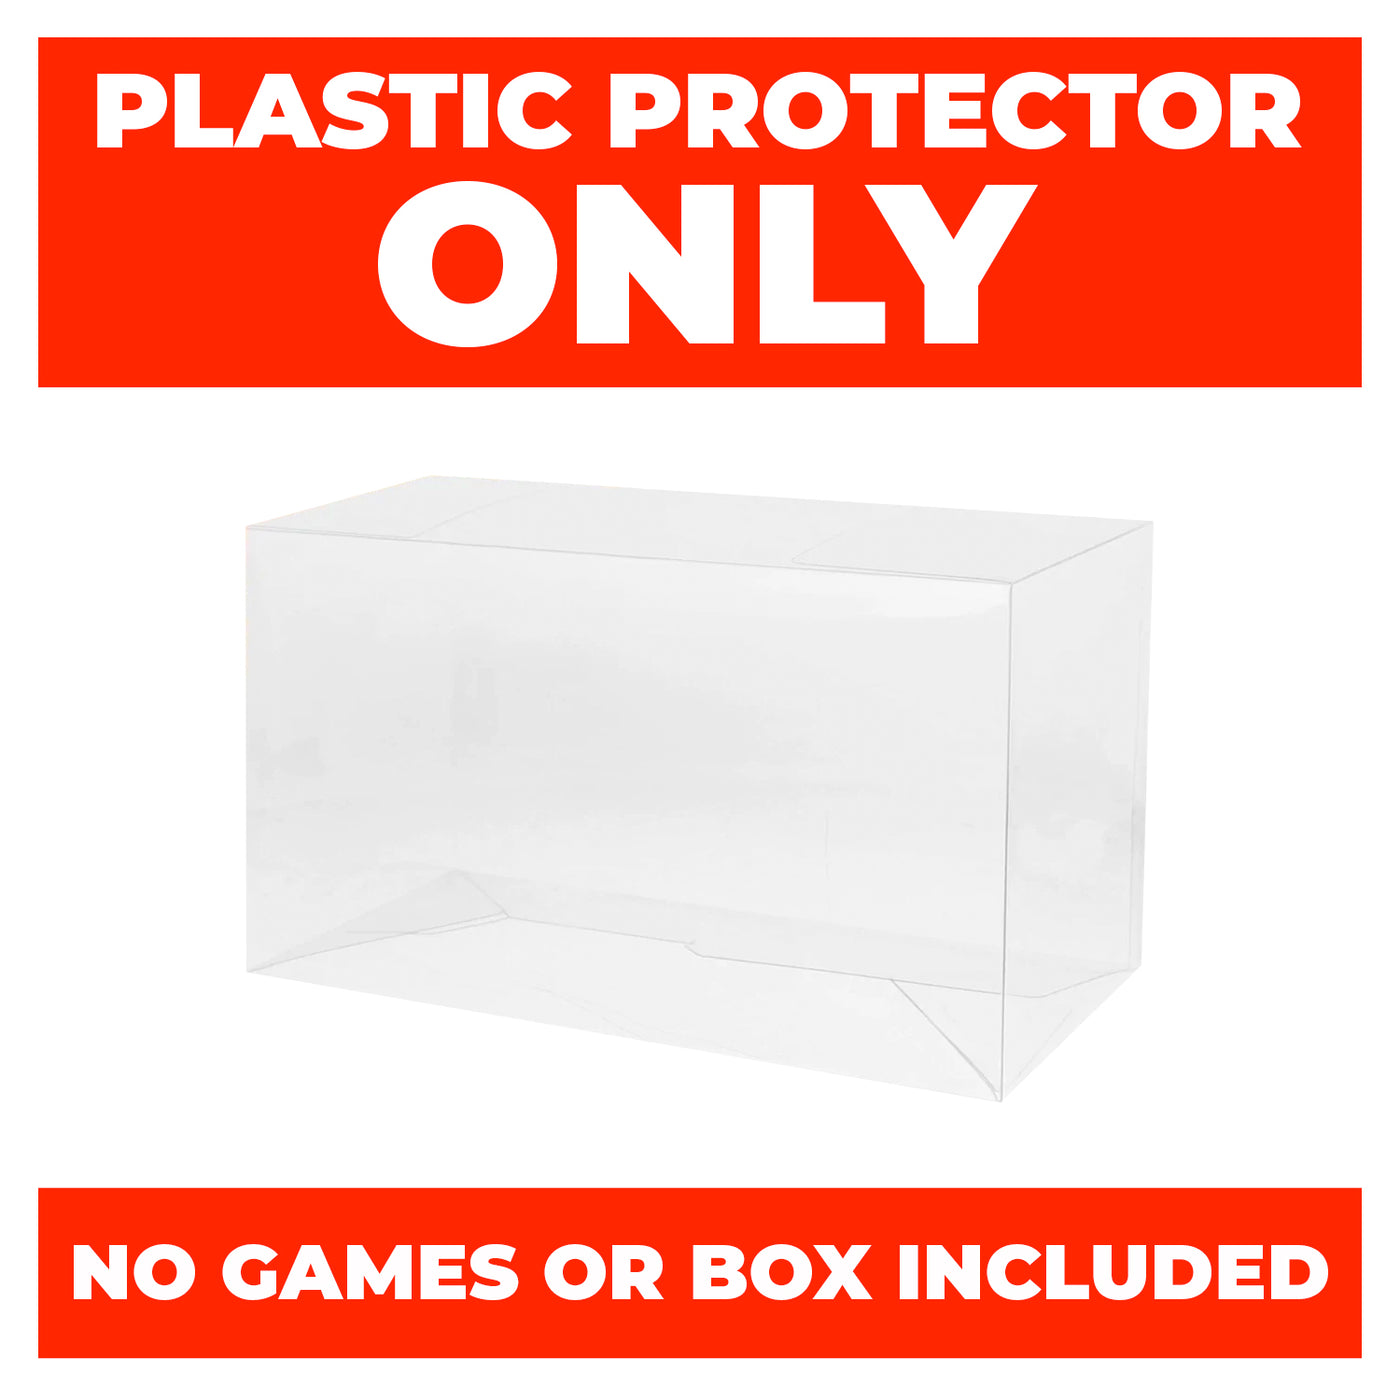 Plastic Protector for NINTENDO Wii U Video Game Console Box 0.50mm thick, UV & Scratch Resistant on The Pop Protector Guide by Display Geek